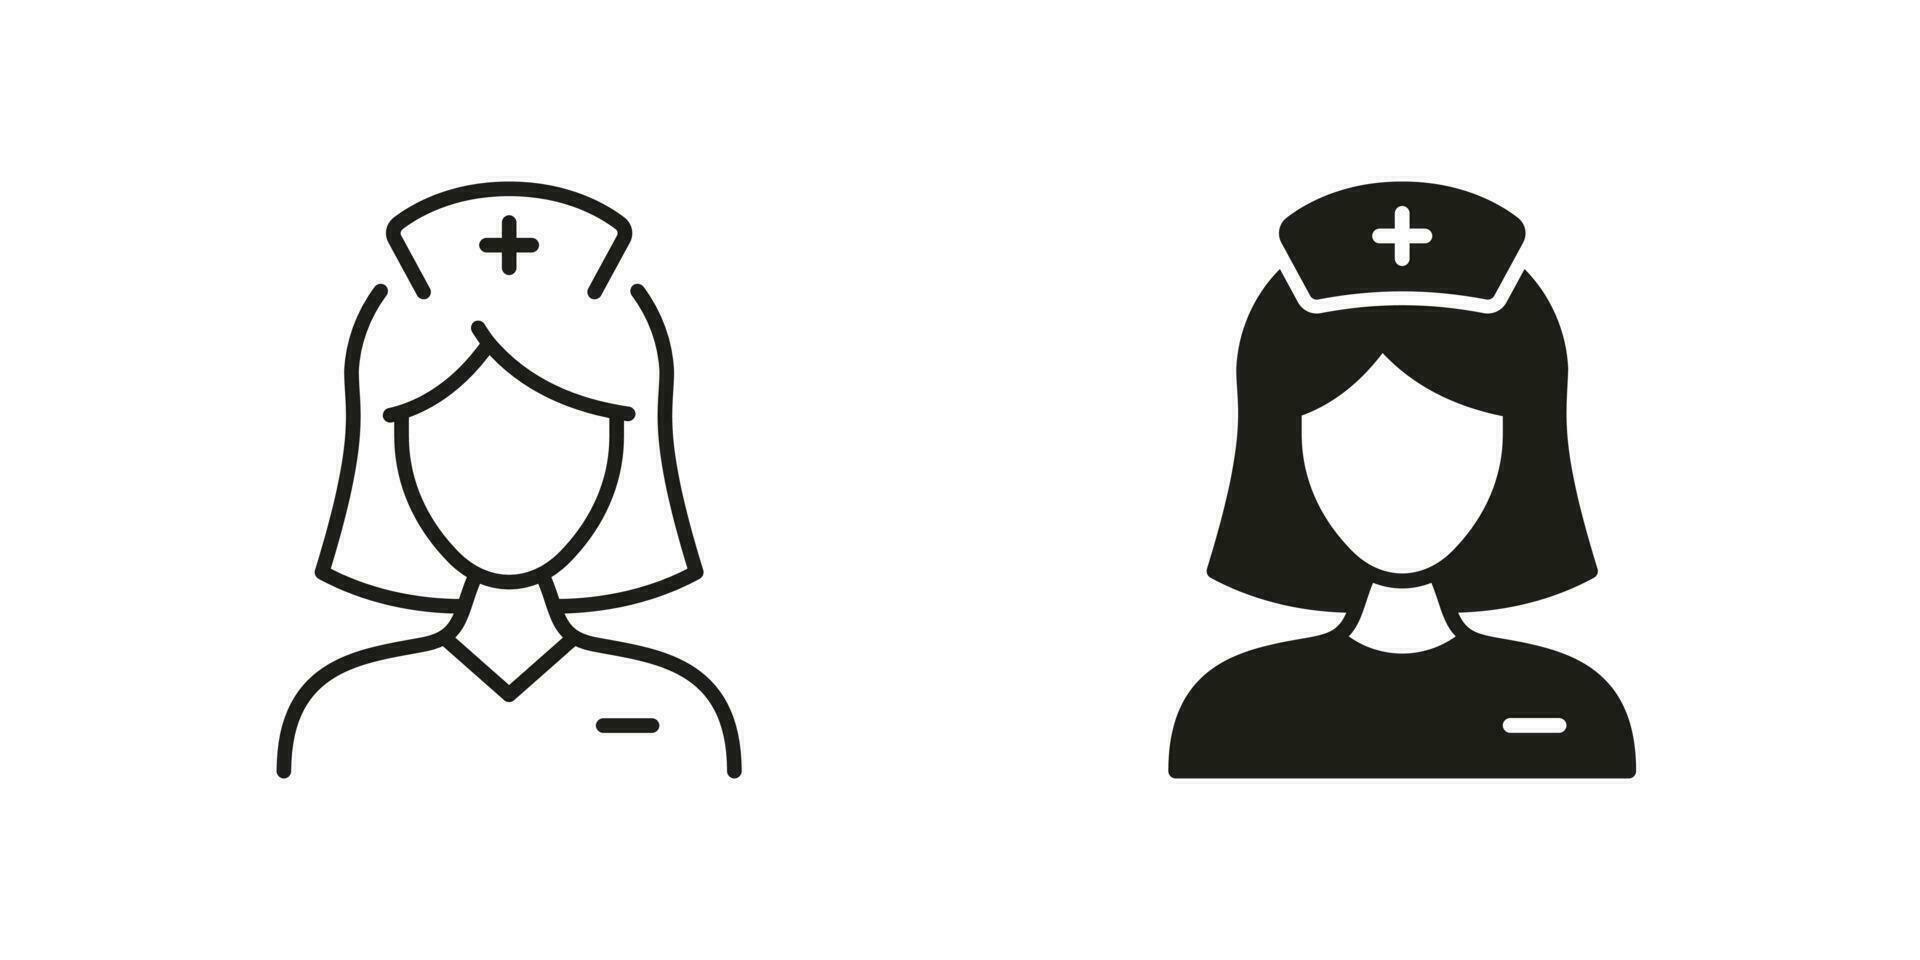 Hospital Staff Pictogram. Doctor Woman Line and Silhouette Black Icon Set. Female Medical Specialist Sign. Healthcare Physician Professional. Nurse Symbol Collection. Isolated Vector Illustration.